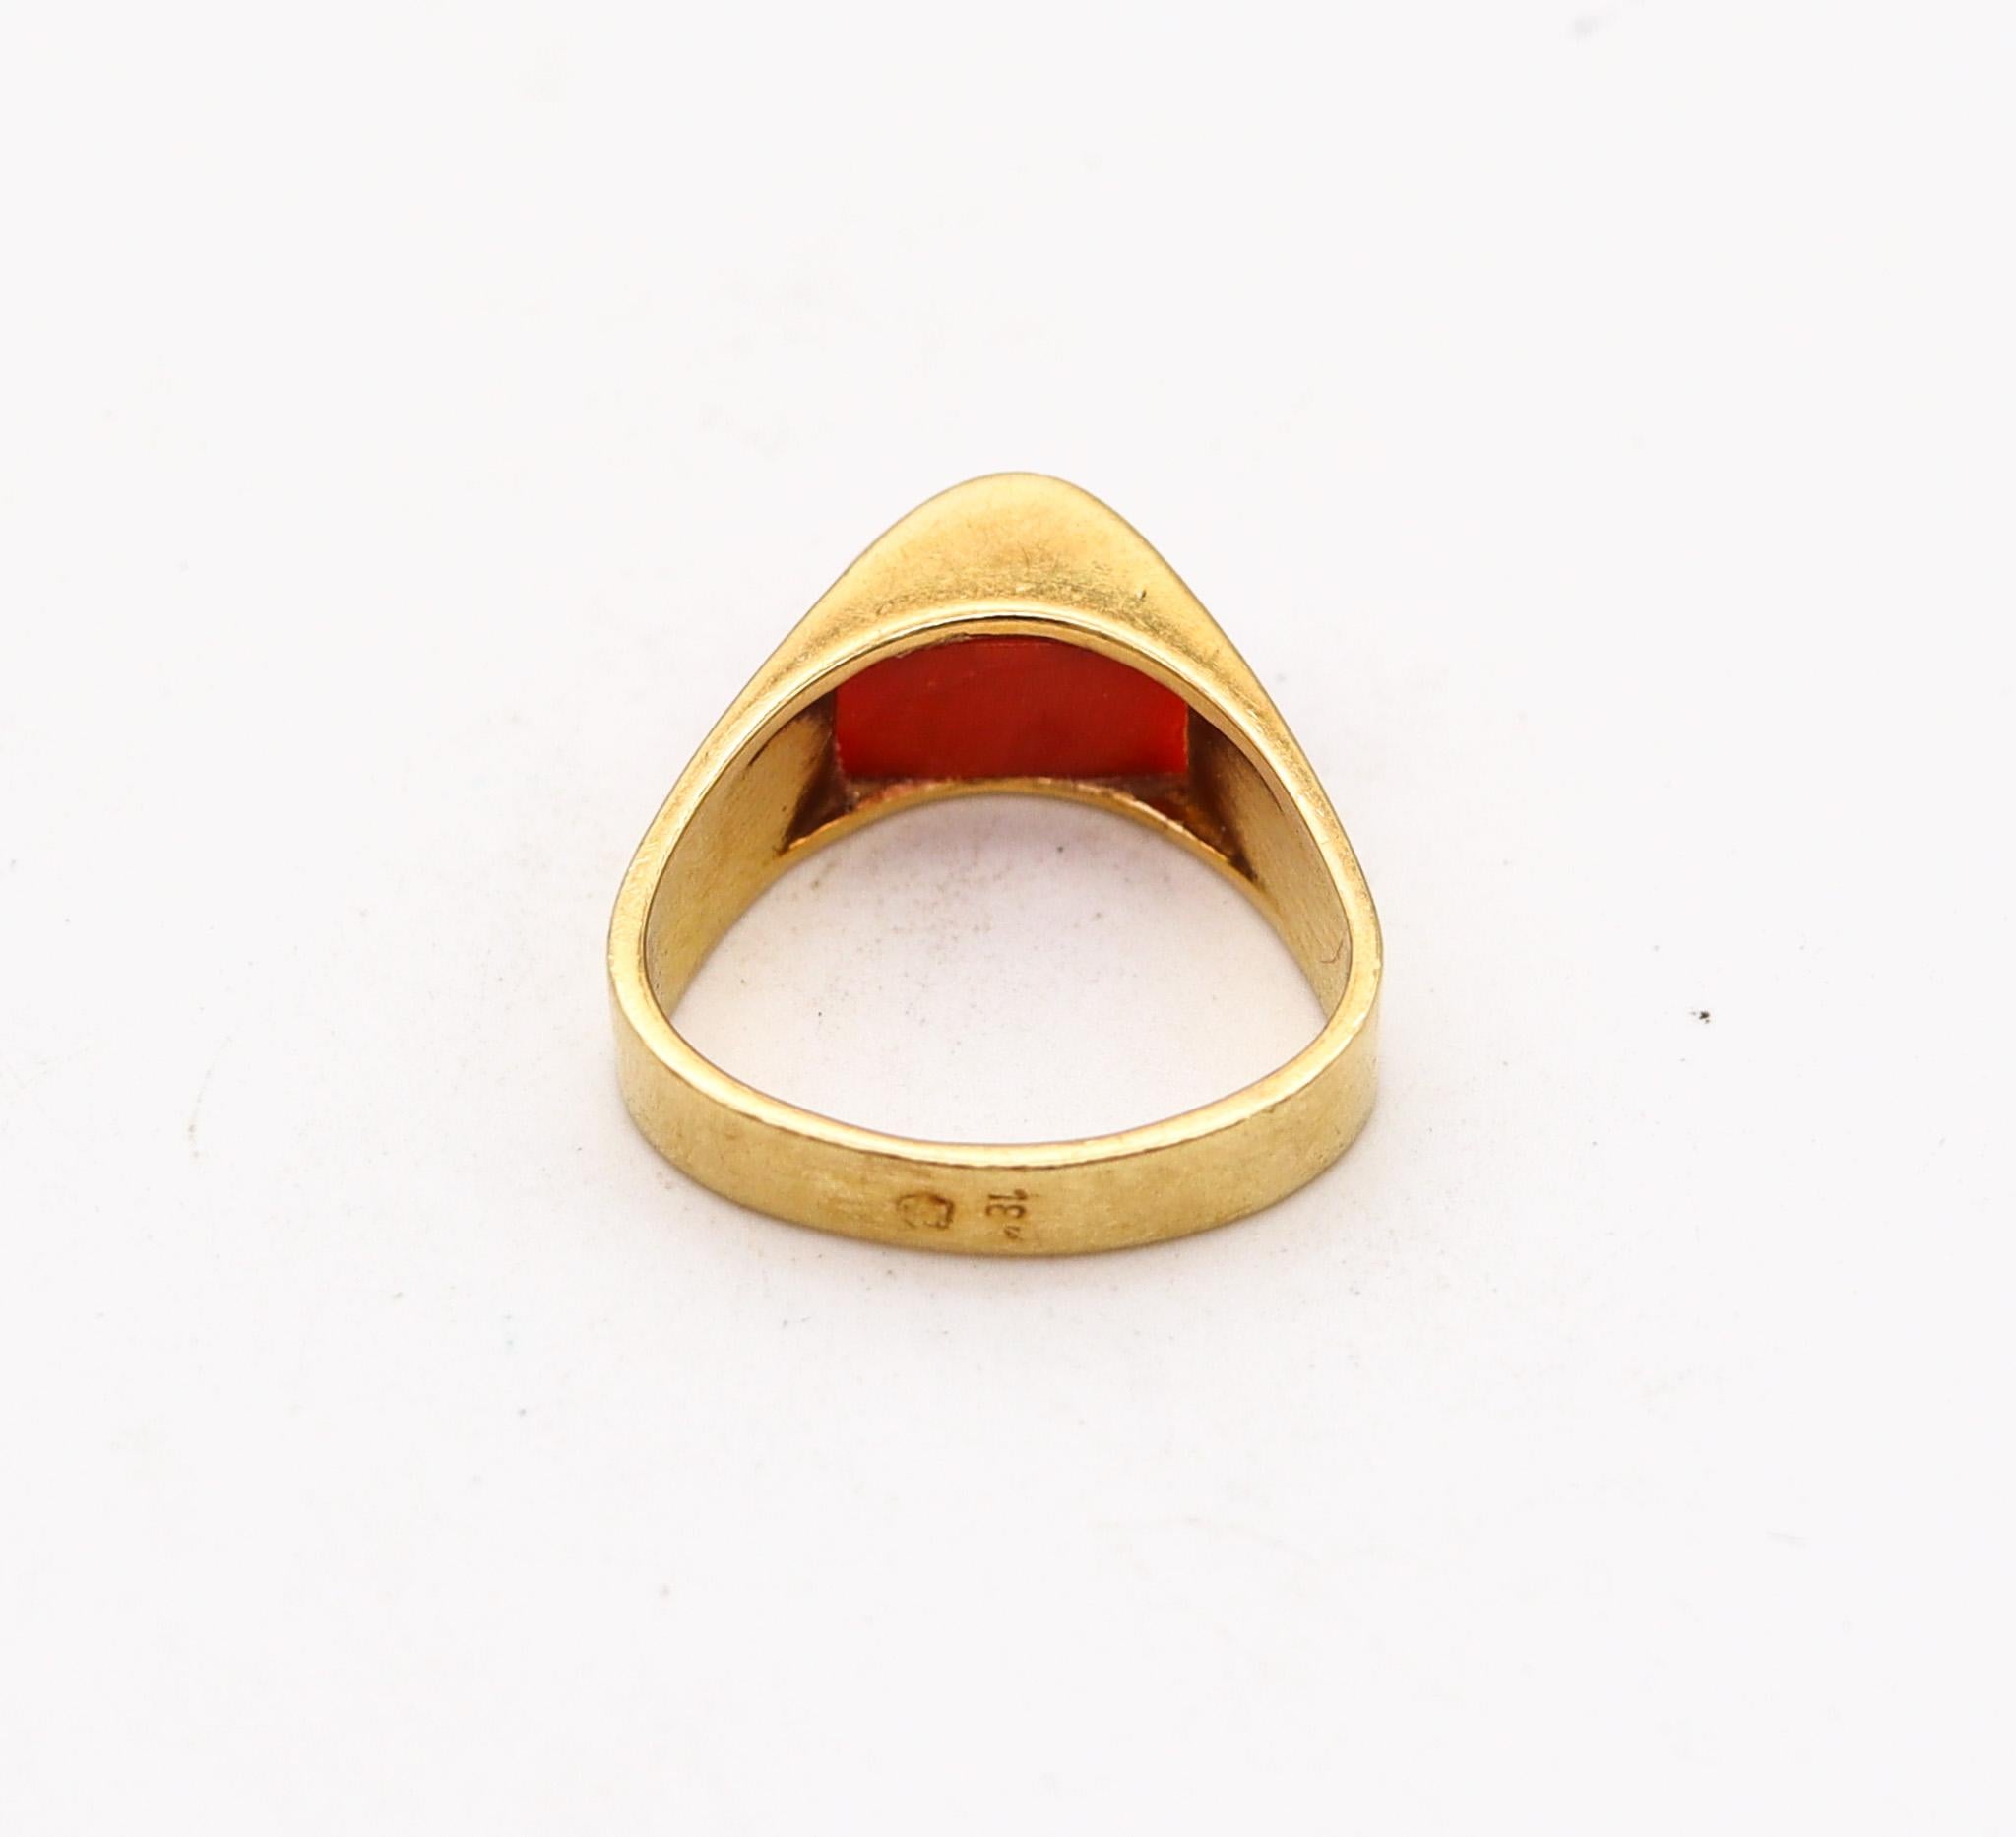 Cabochon Octavio Sarda Palau 1970 Barcelona Triangular Ring In 18Kt Gold With Coral For Sale